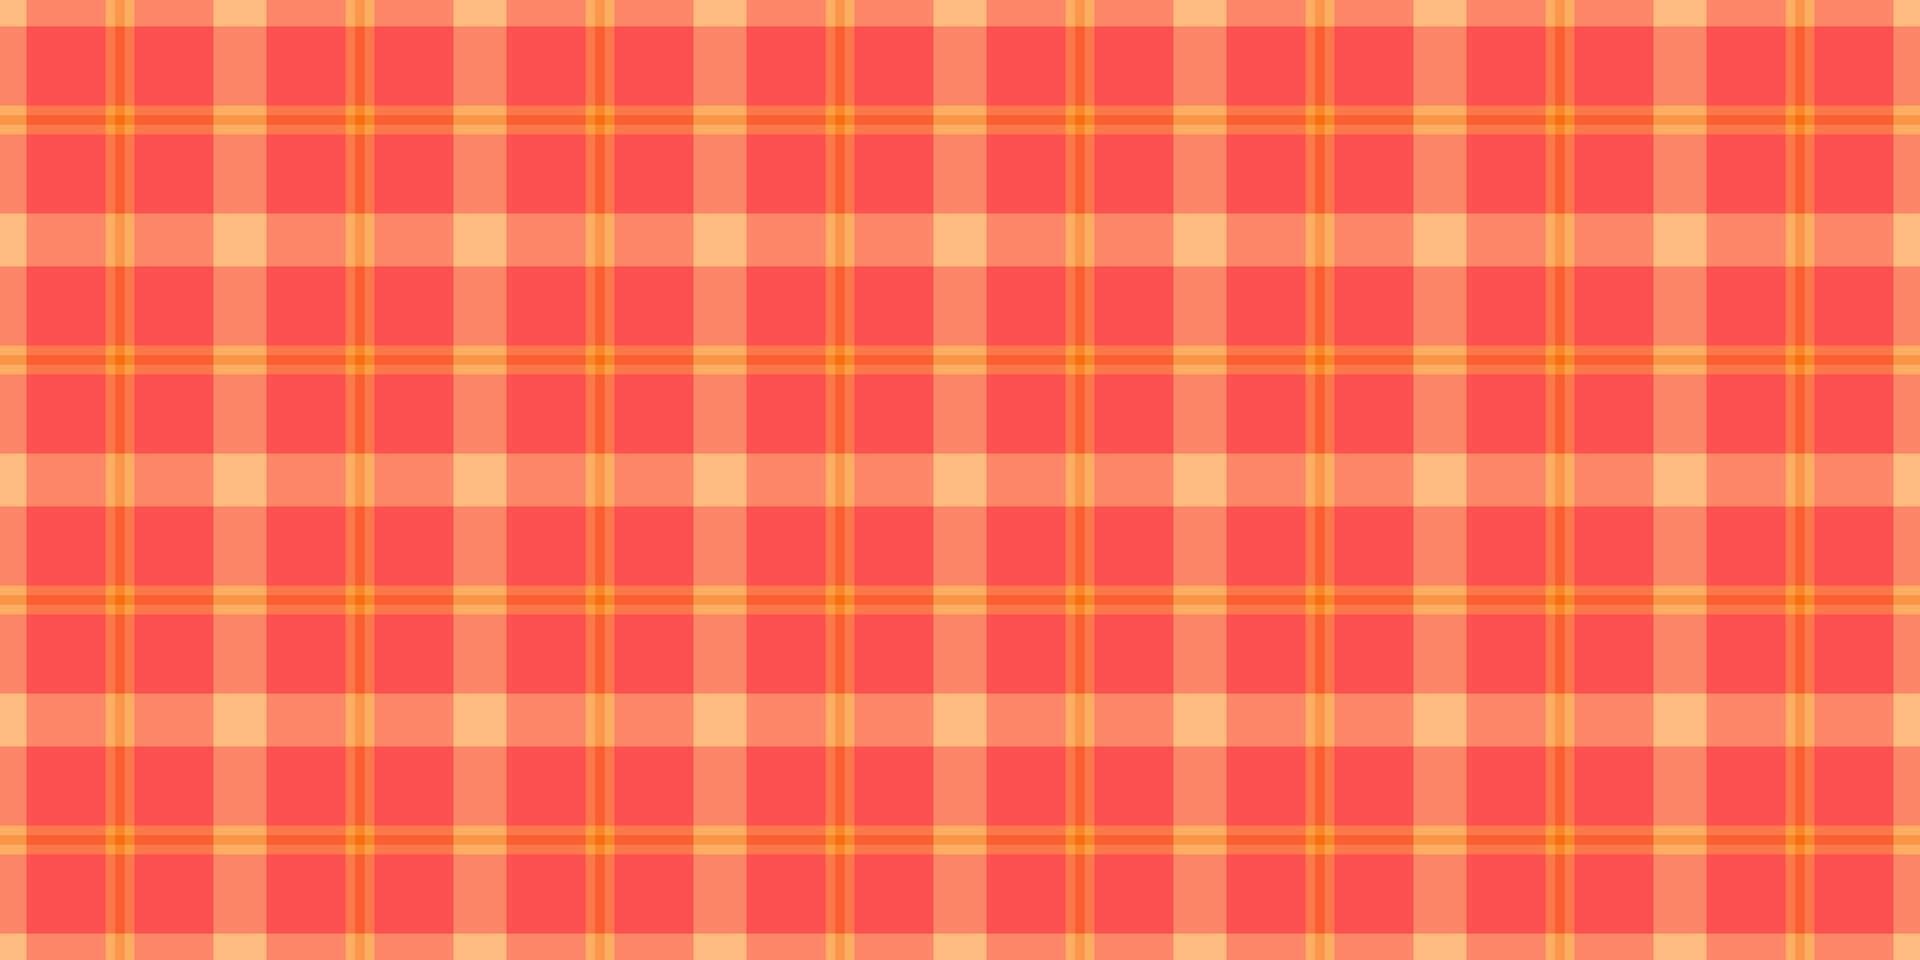 Hippie seamless check textile, ceremony texture fabric tartan. Quality pattern plaid background vector in red and orange colors.